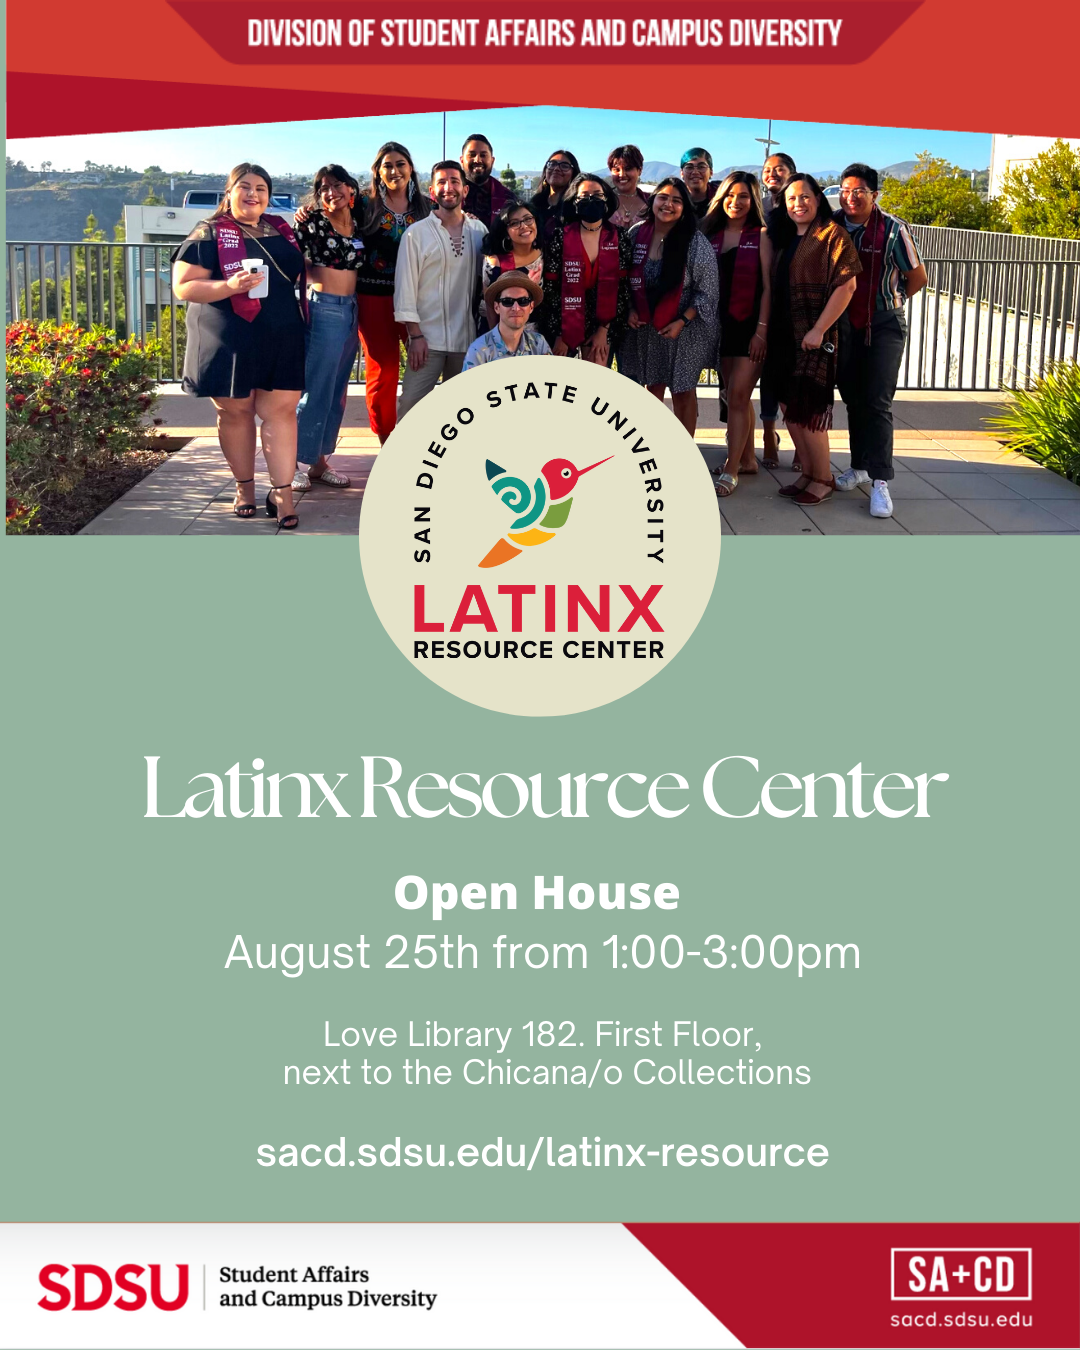 Latinx Resource Center Welcome Mixer Aug 25, 1 - 3 pm at the Love Library 182